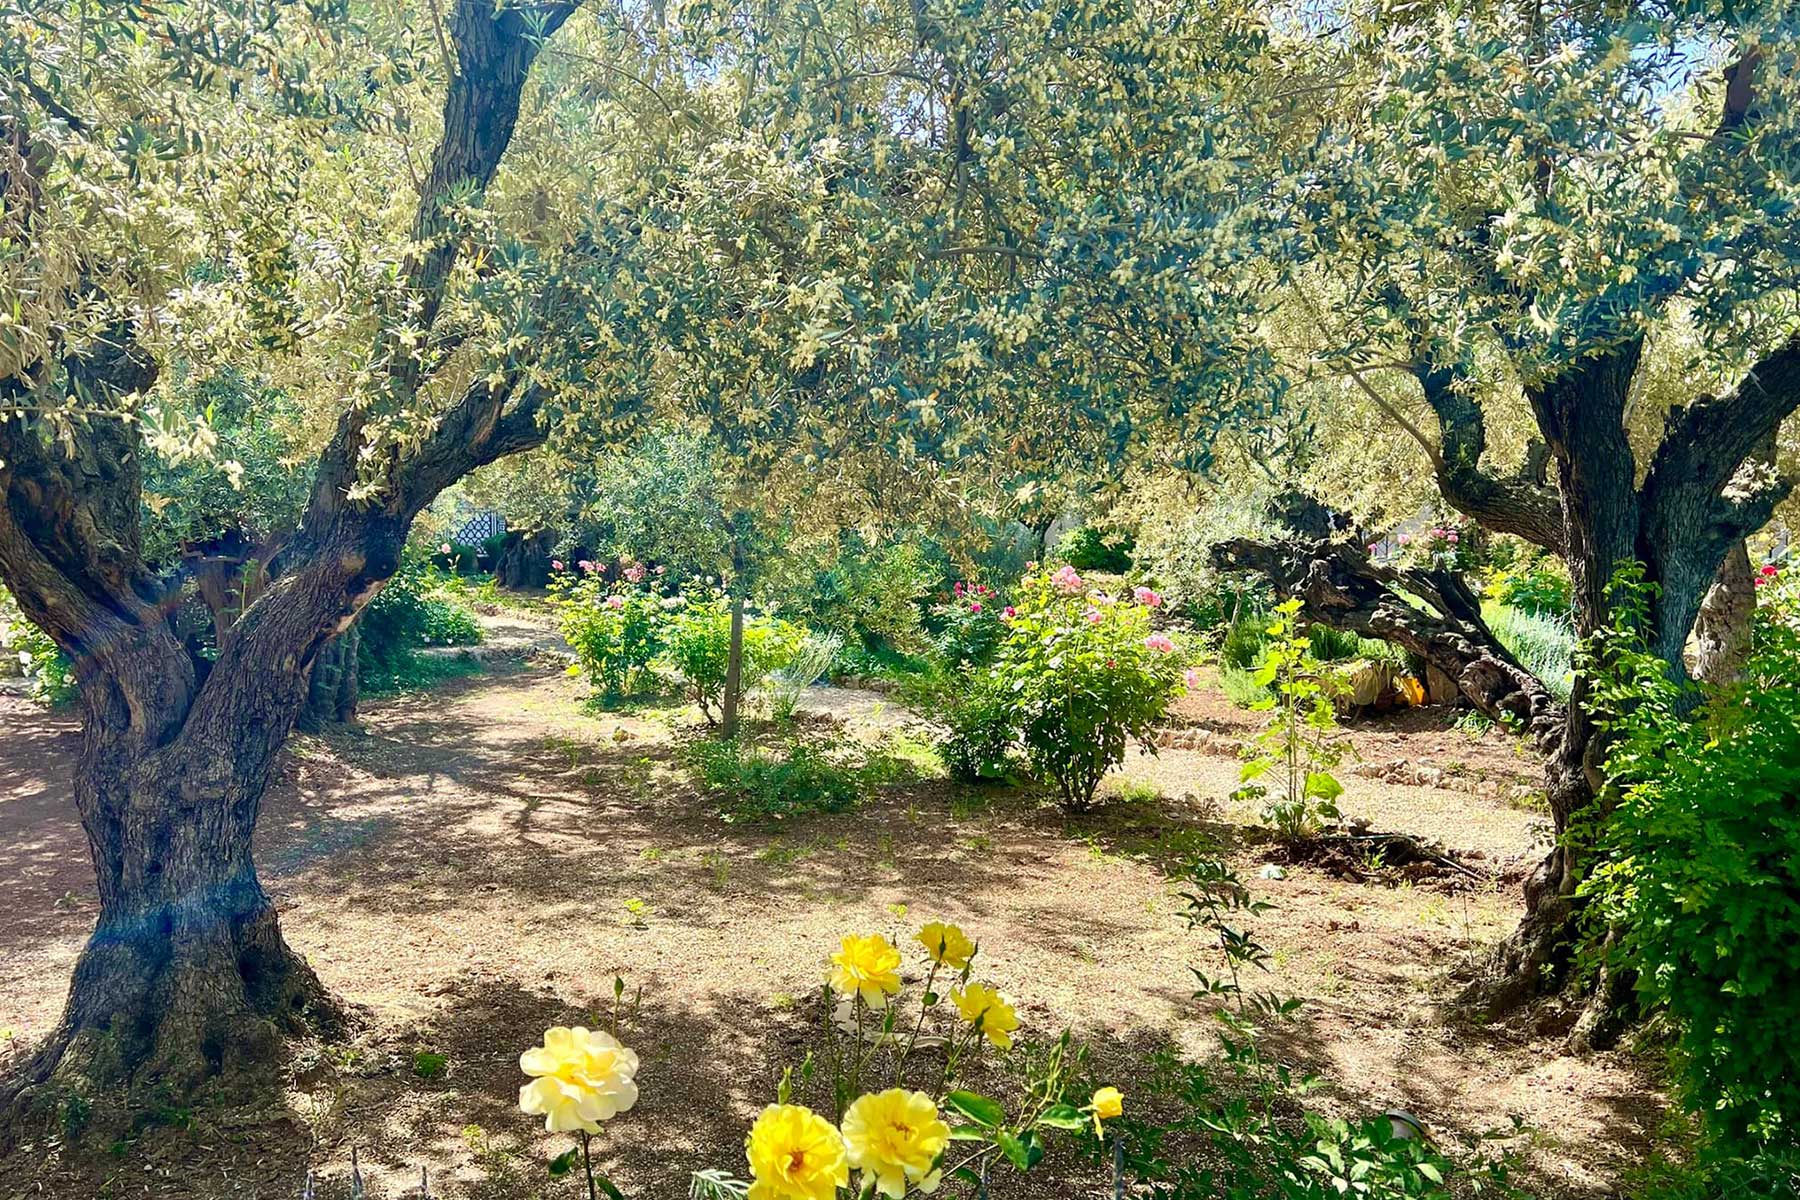 Picture of beautiful trees and plants in the Garden of Gethsemane